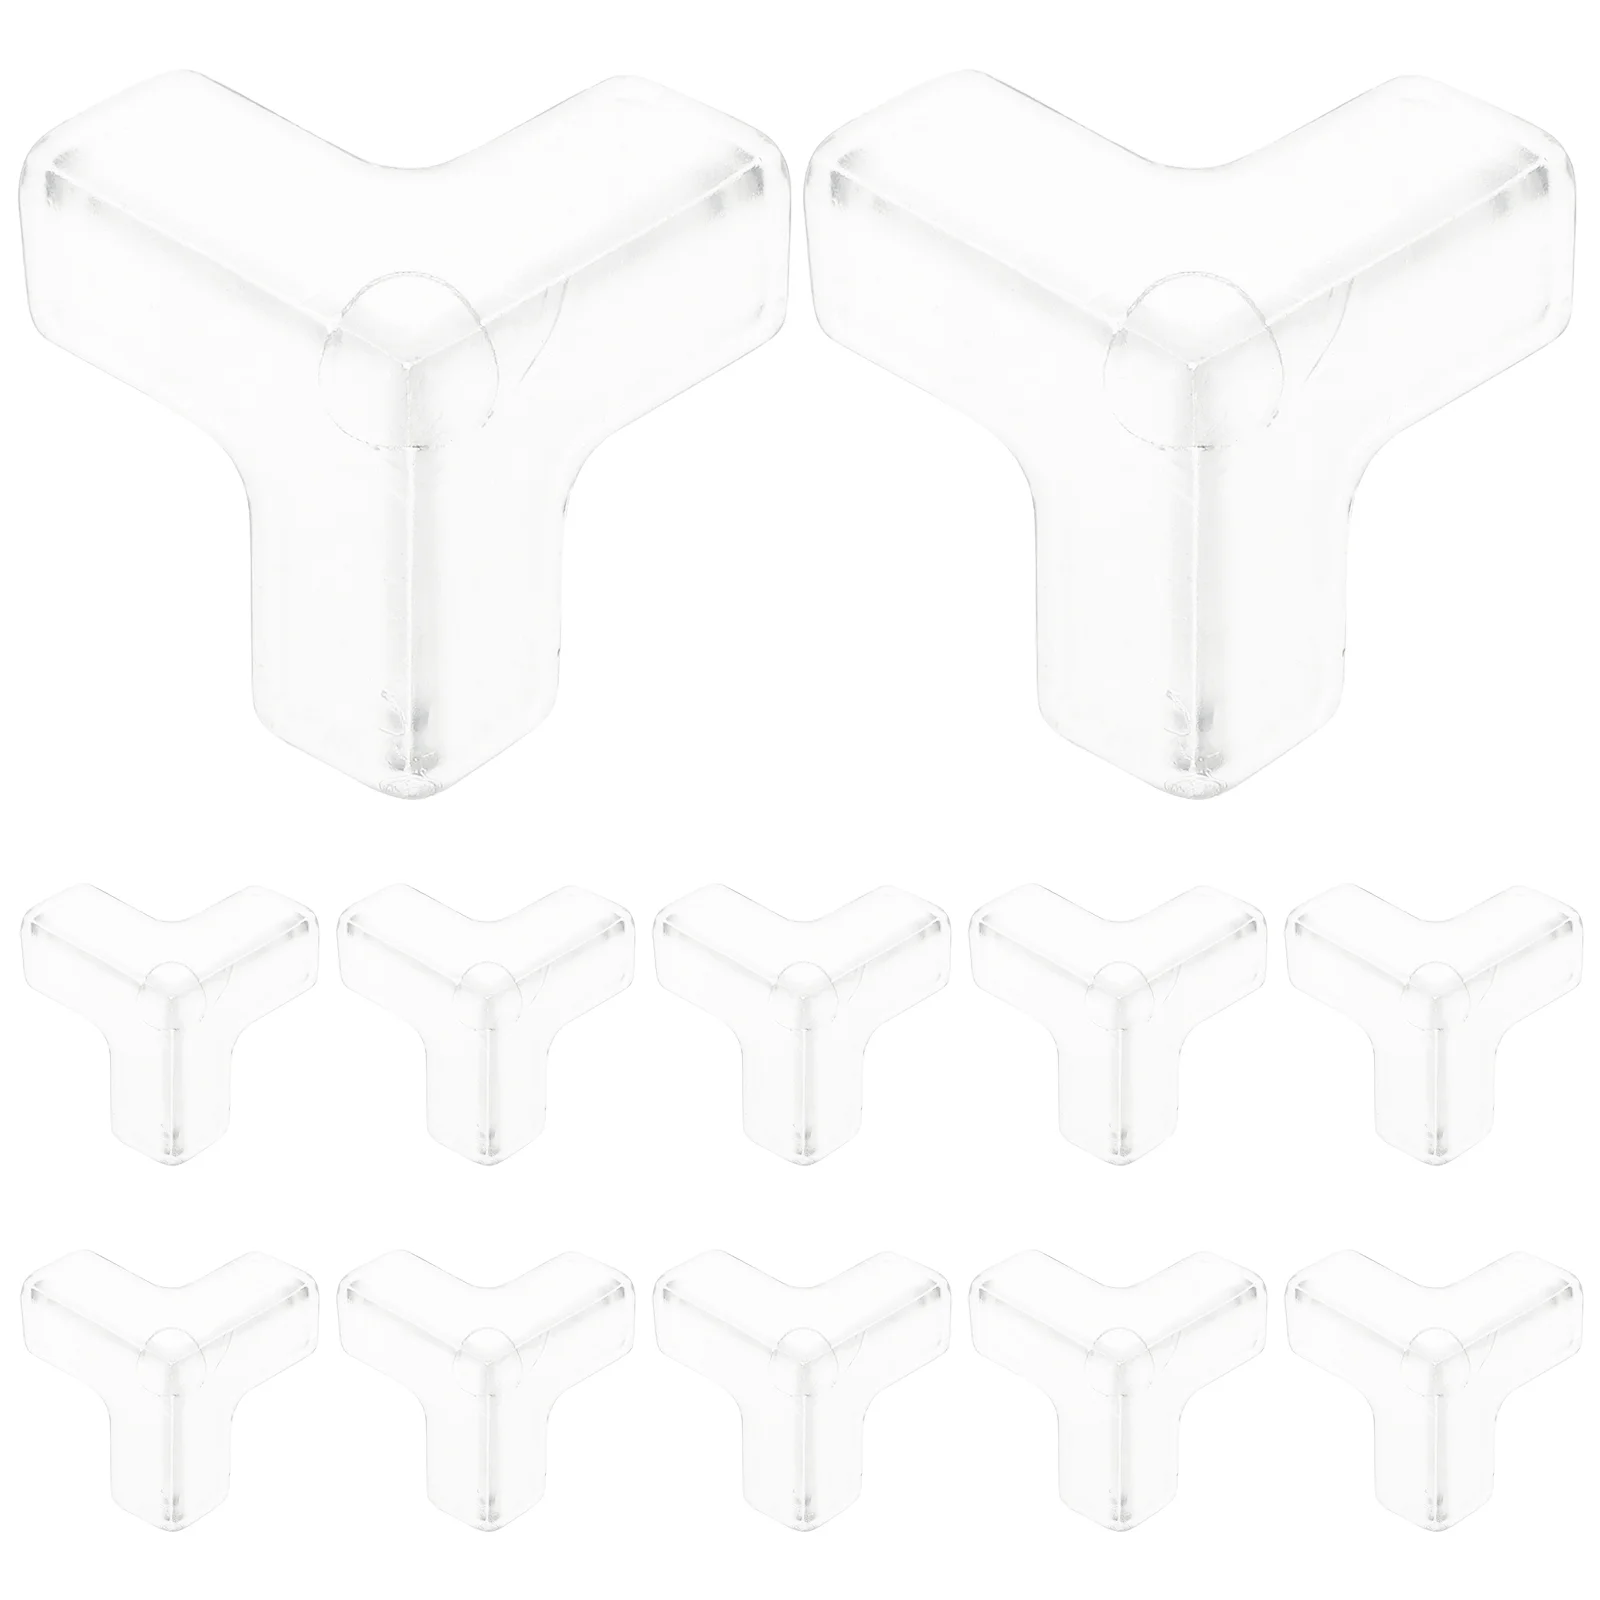 

16 Pcs Corner Protectors for Furniture Guards Buffer Table Covers Bumpers Infant